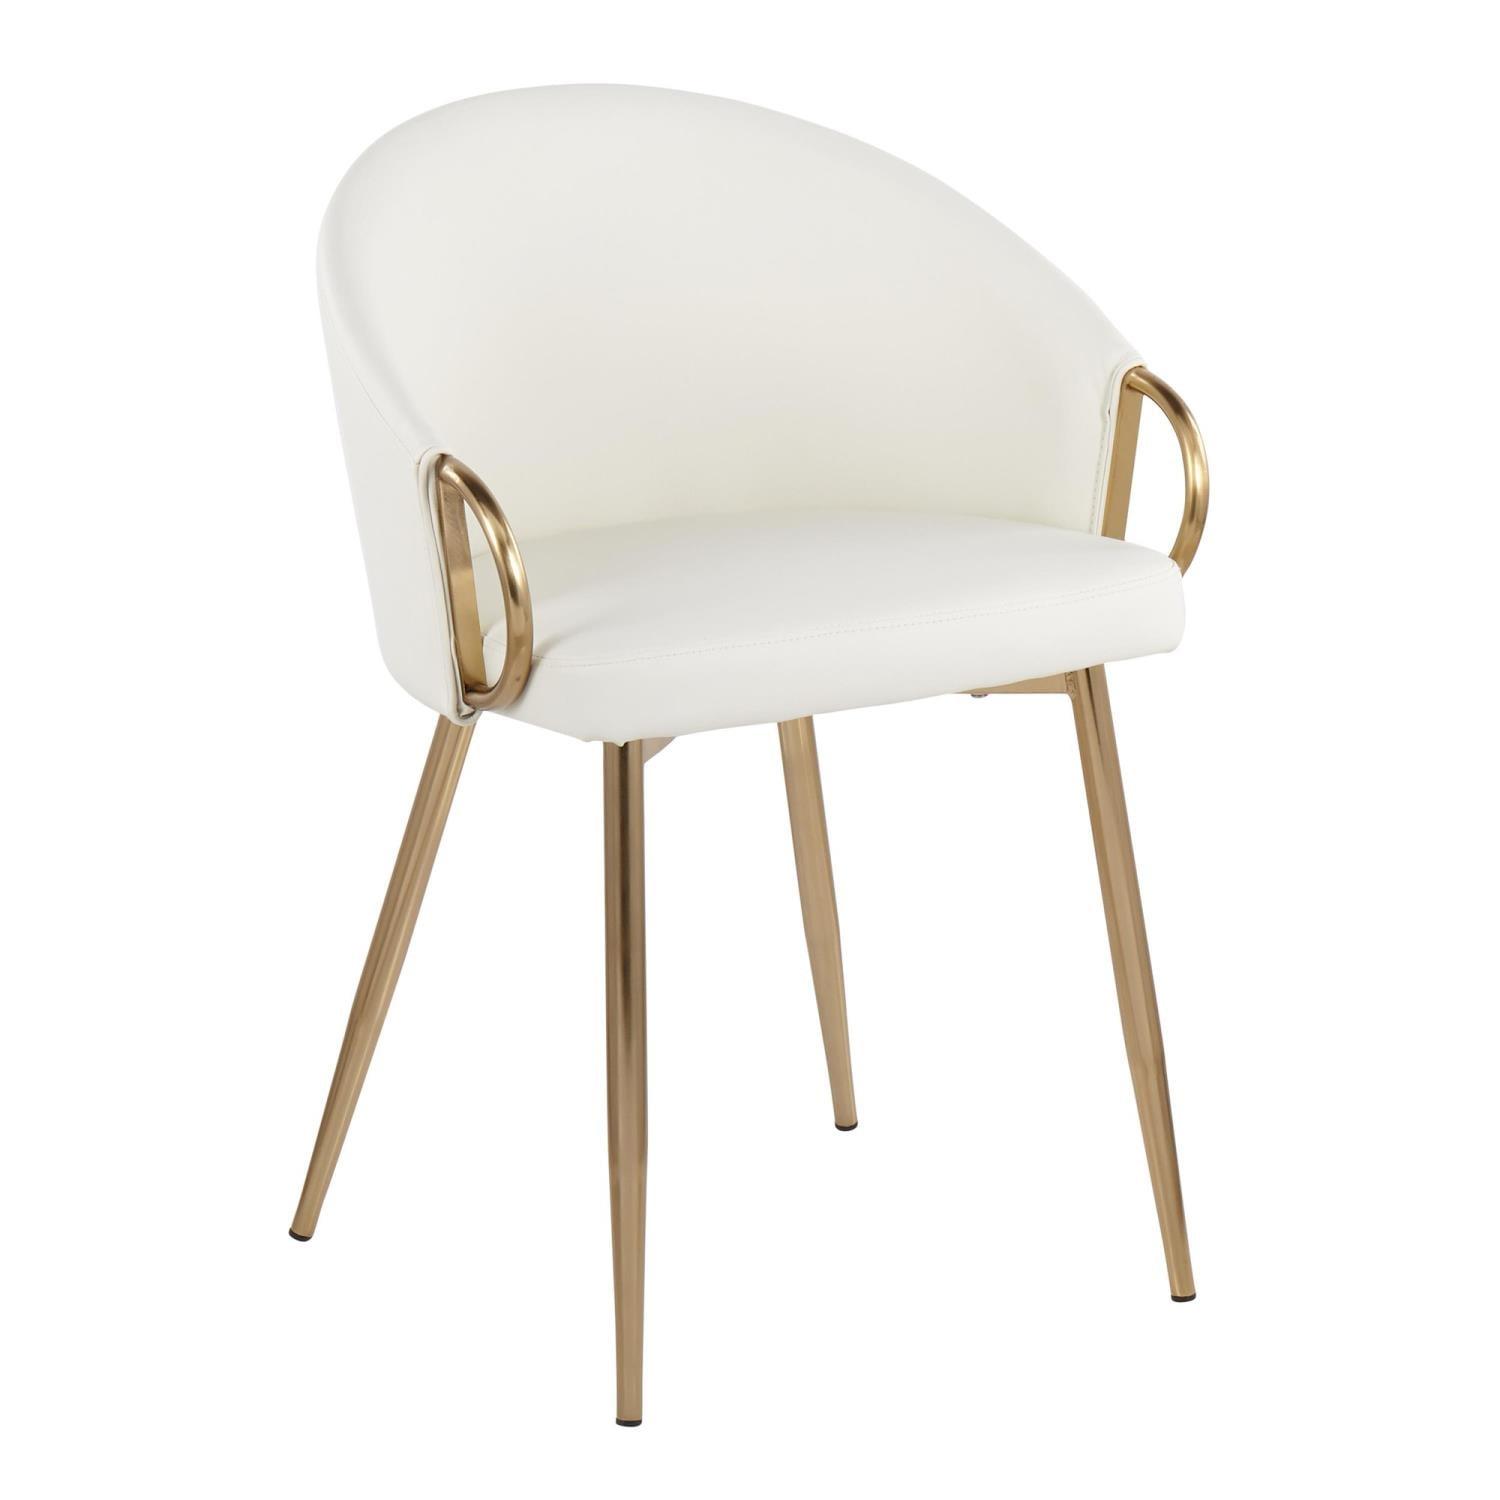 Contemporary White Faux Leather and Gold Metal Arm Chair